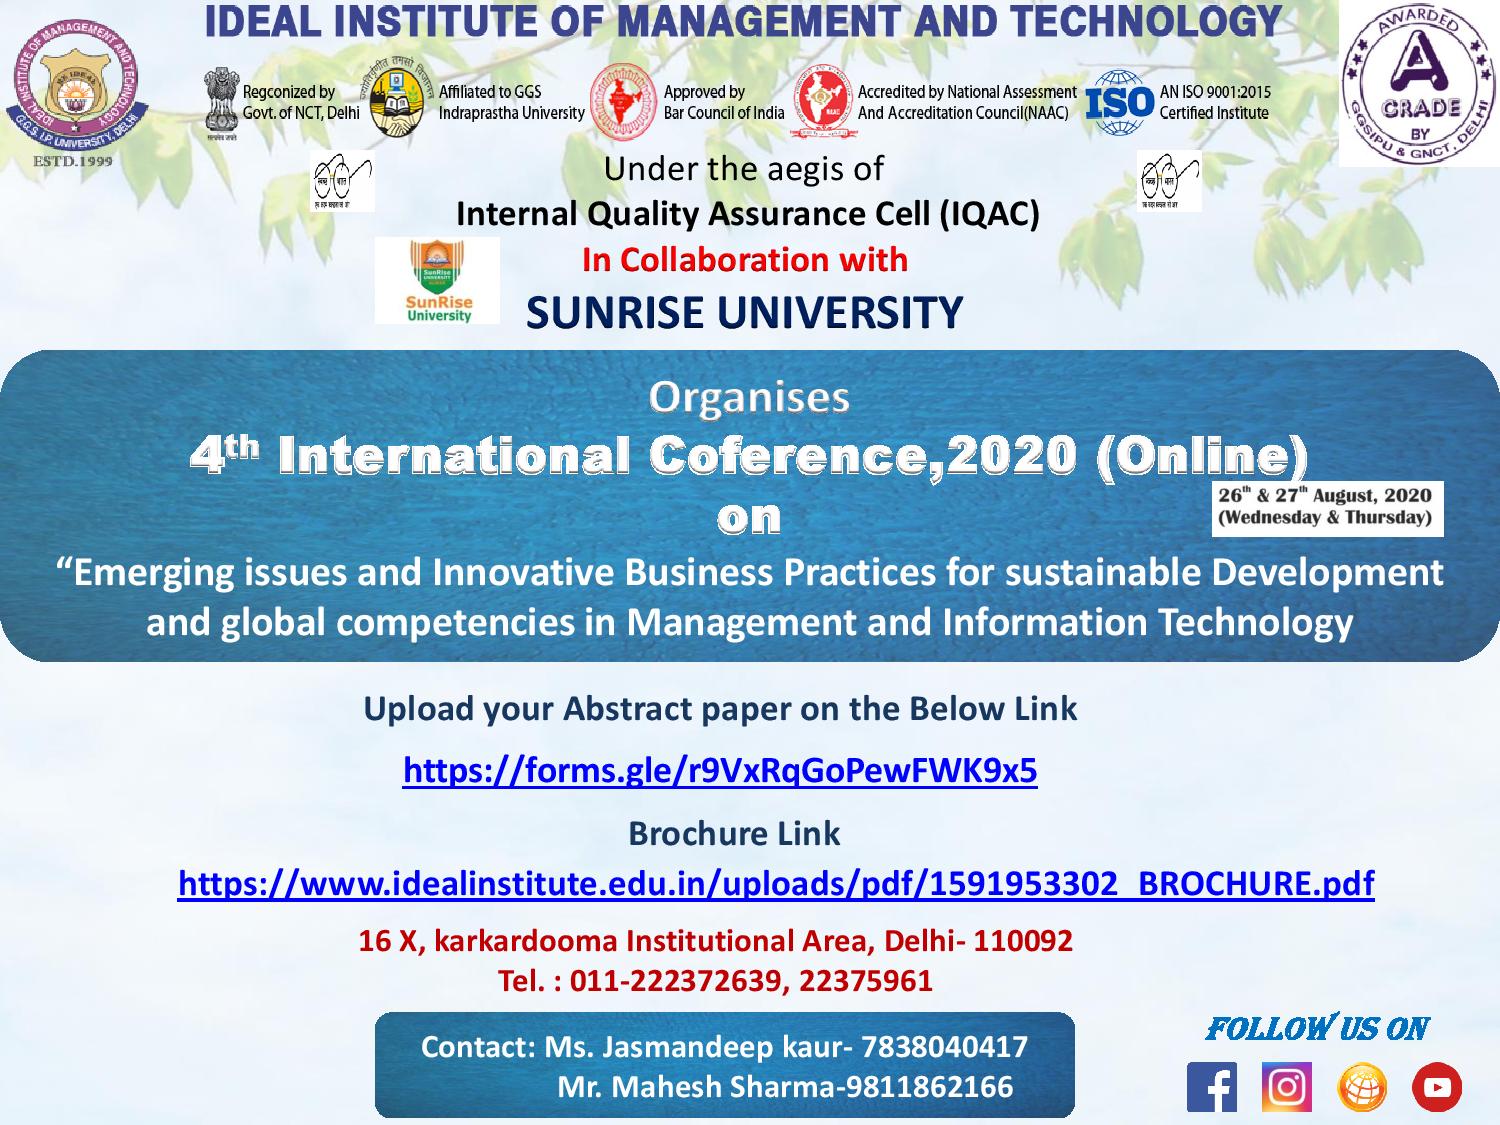 International Conference on Emerging Issues and Innovative Business Practices for Sustainable Development and Global Competencies in Management and Information Technology 2020